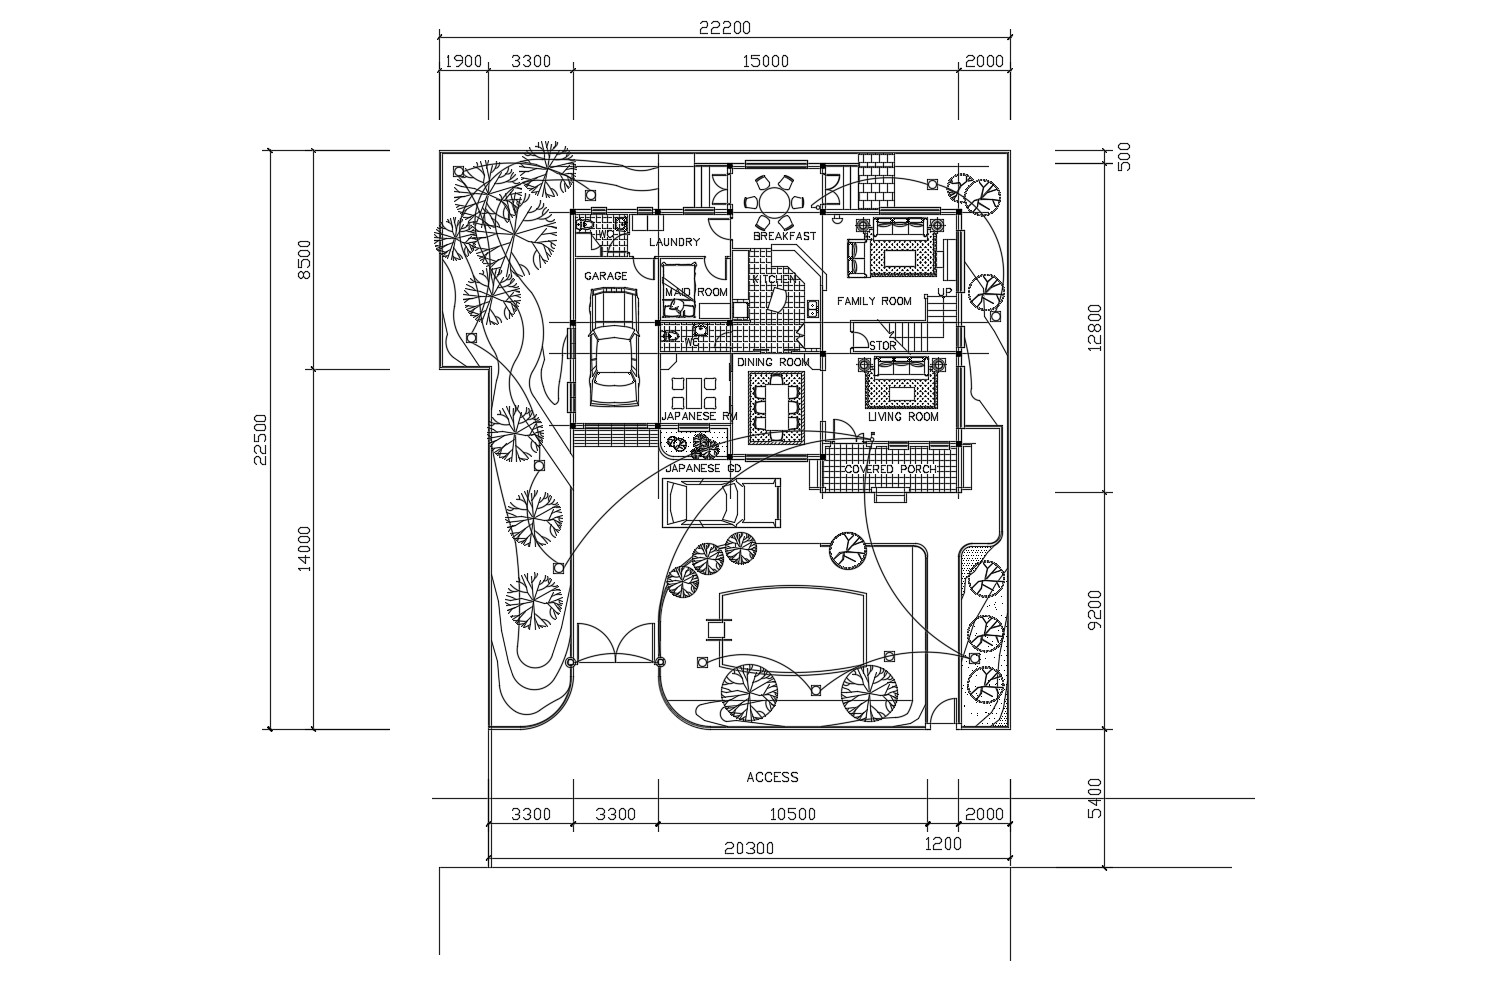 Small House Layout Plan In DWG File - Cadbull